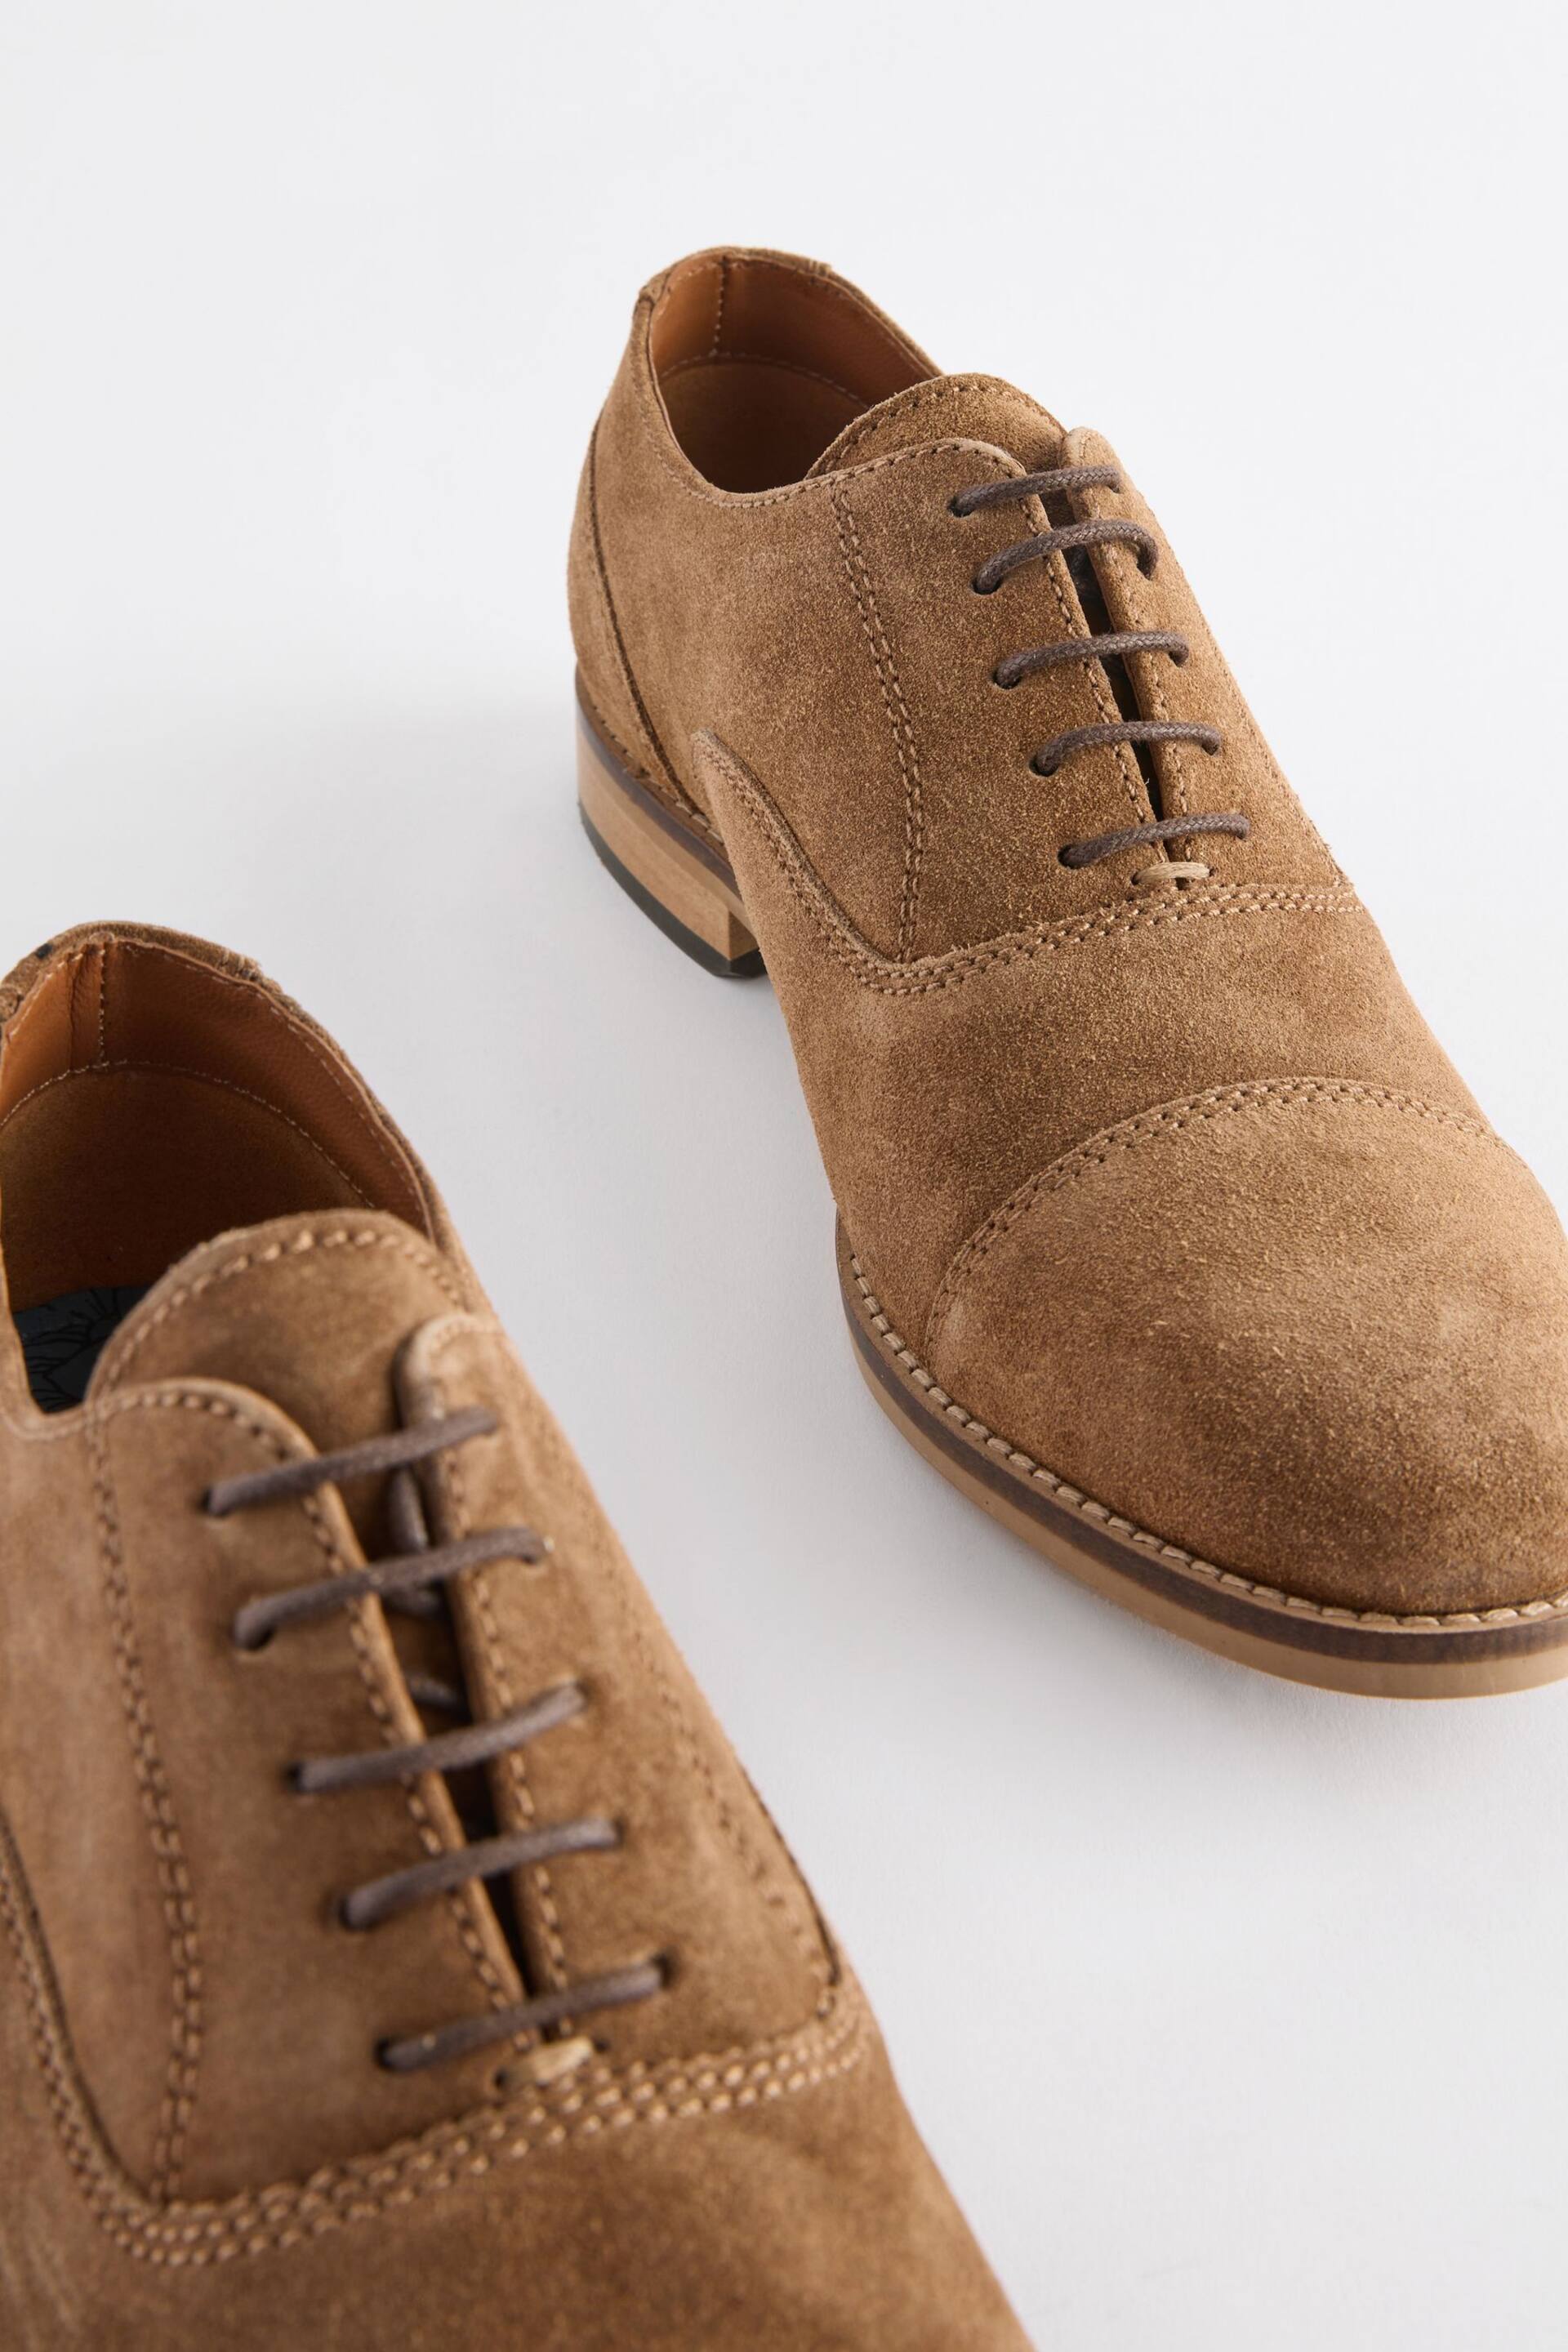 Stone Suede Contrast Sole Toecap Shoes - Image 4 of 6